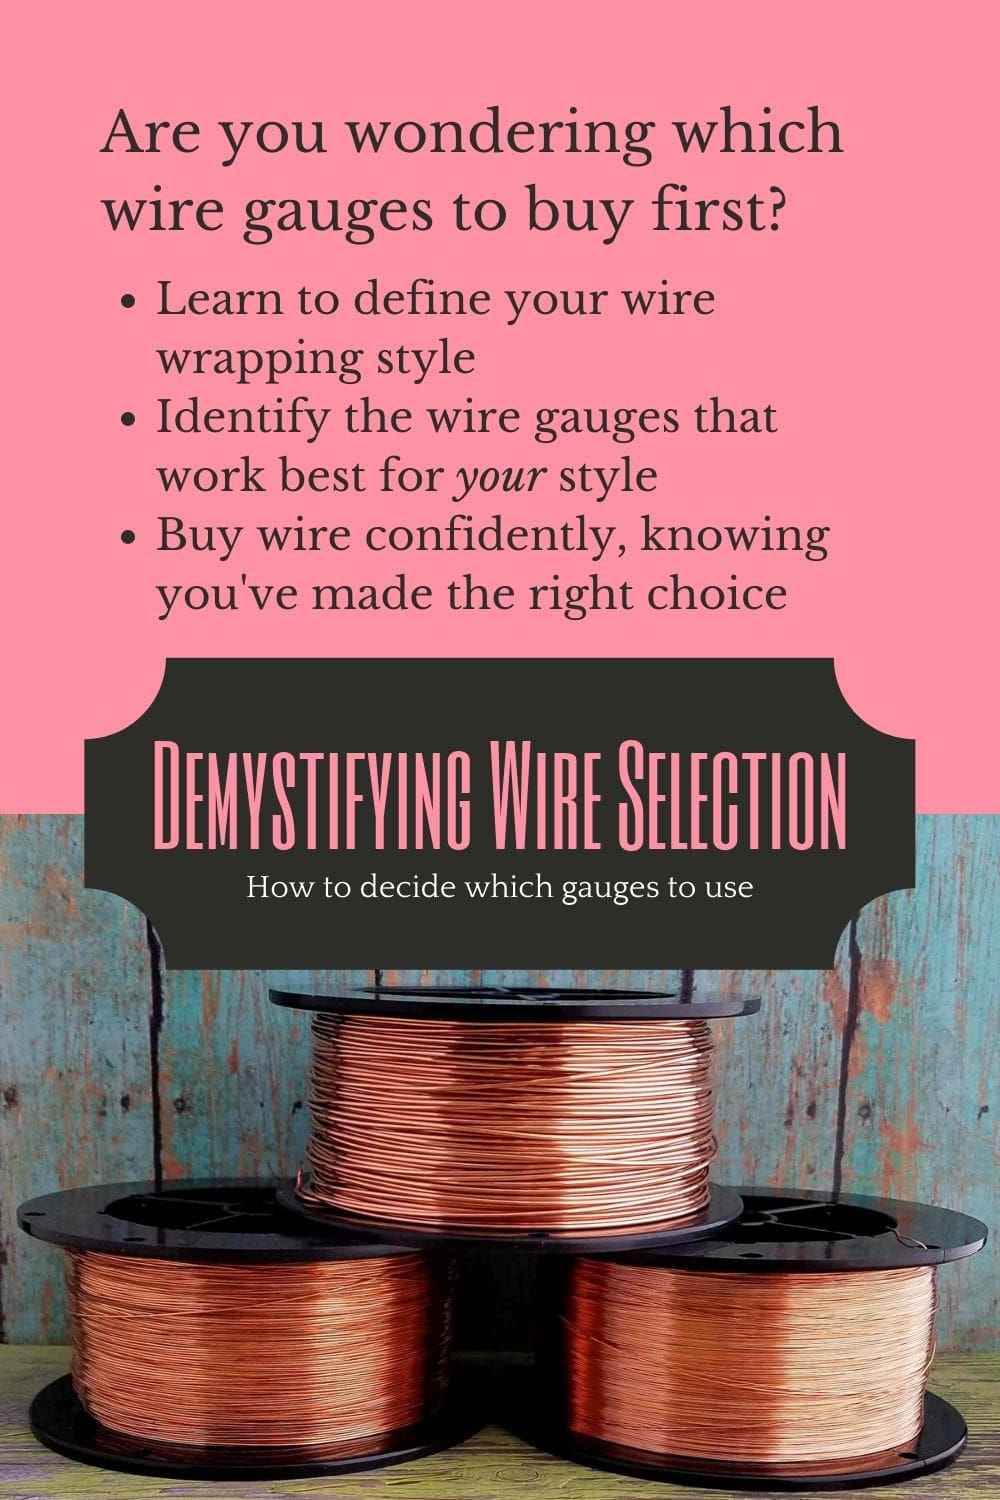 So, you want to make wire jewelry. And now you're wondering which wire gauges you should invest in first? You'll find the answer to that question (and more) in this post where I demystify the process of selecting the right wire gauges.